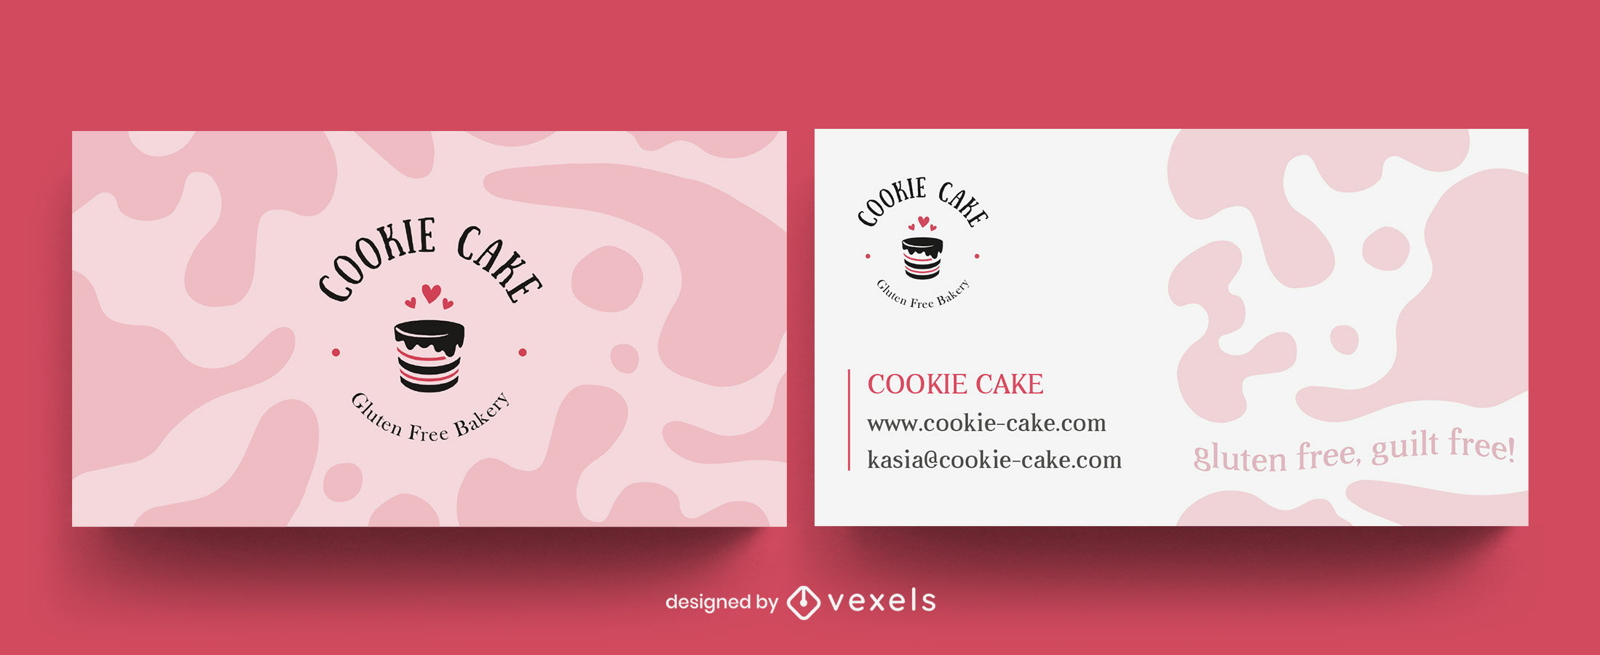 Best business card designs Royalty Free Vector Image